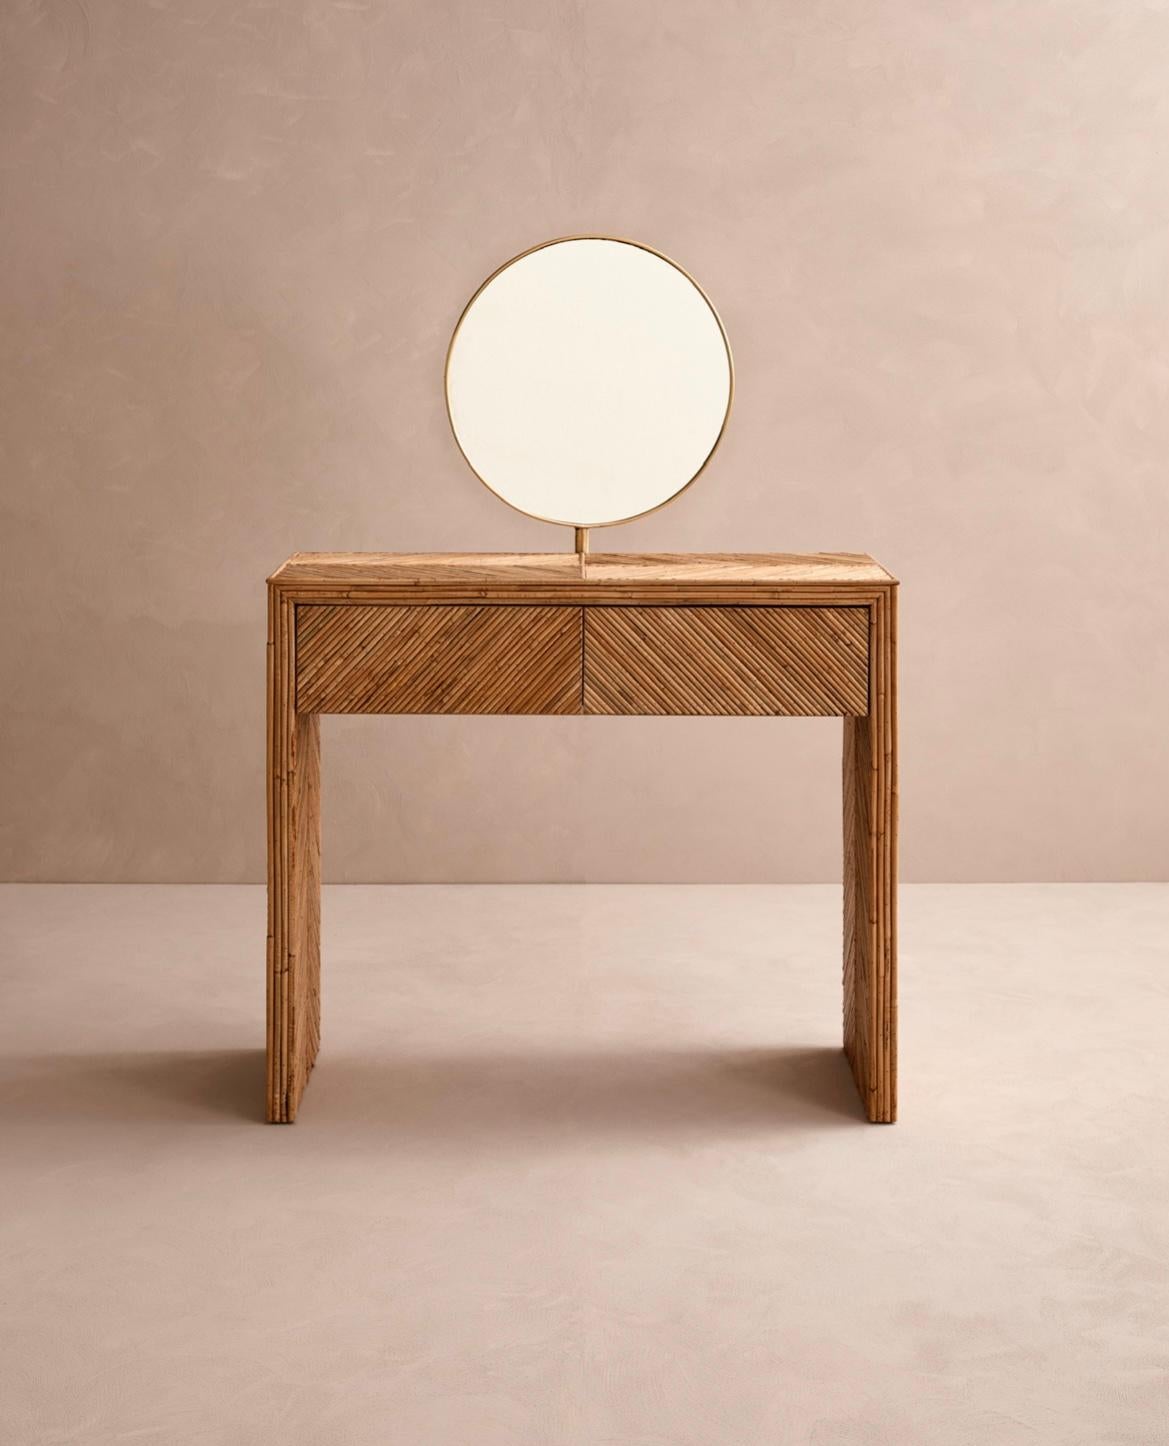 Chic bamboo vanity crafted in Italy. Quality seen in the photos. The mirror is brass. There is a drawer in the front. Perfect entry table or room/bathroom vanity. 